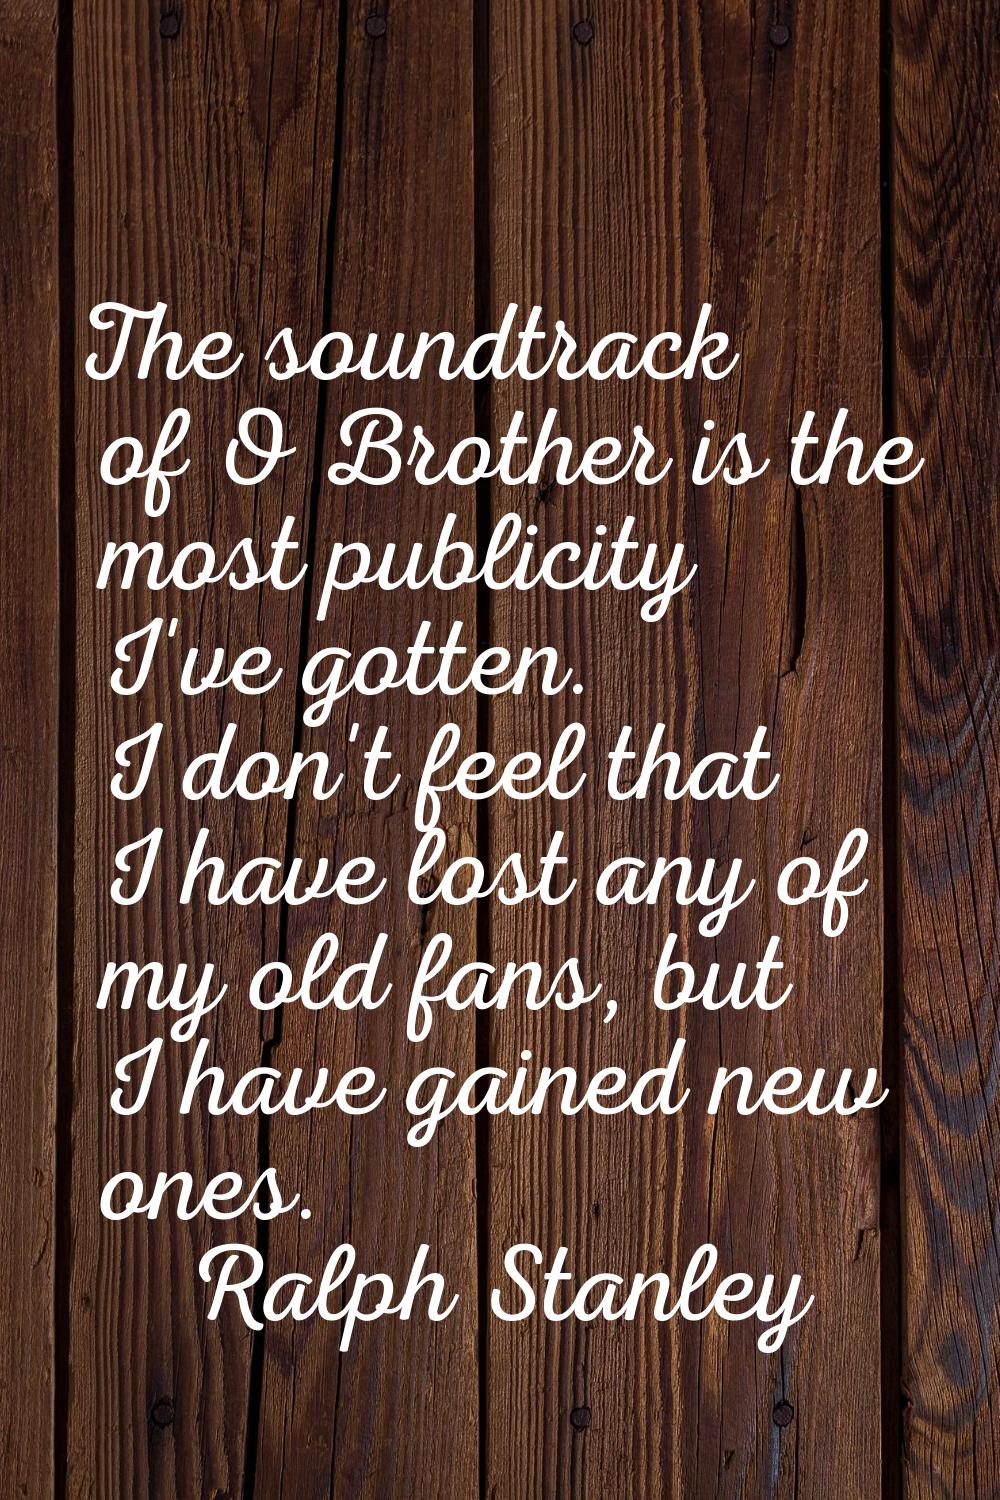 The soundtrack of O Brother is the most publicity I've gotten. I don't feel that I have lost any of